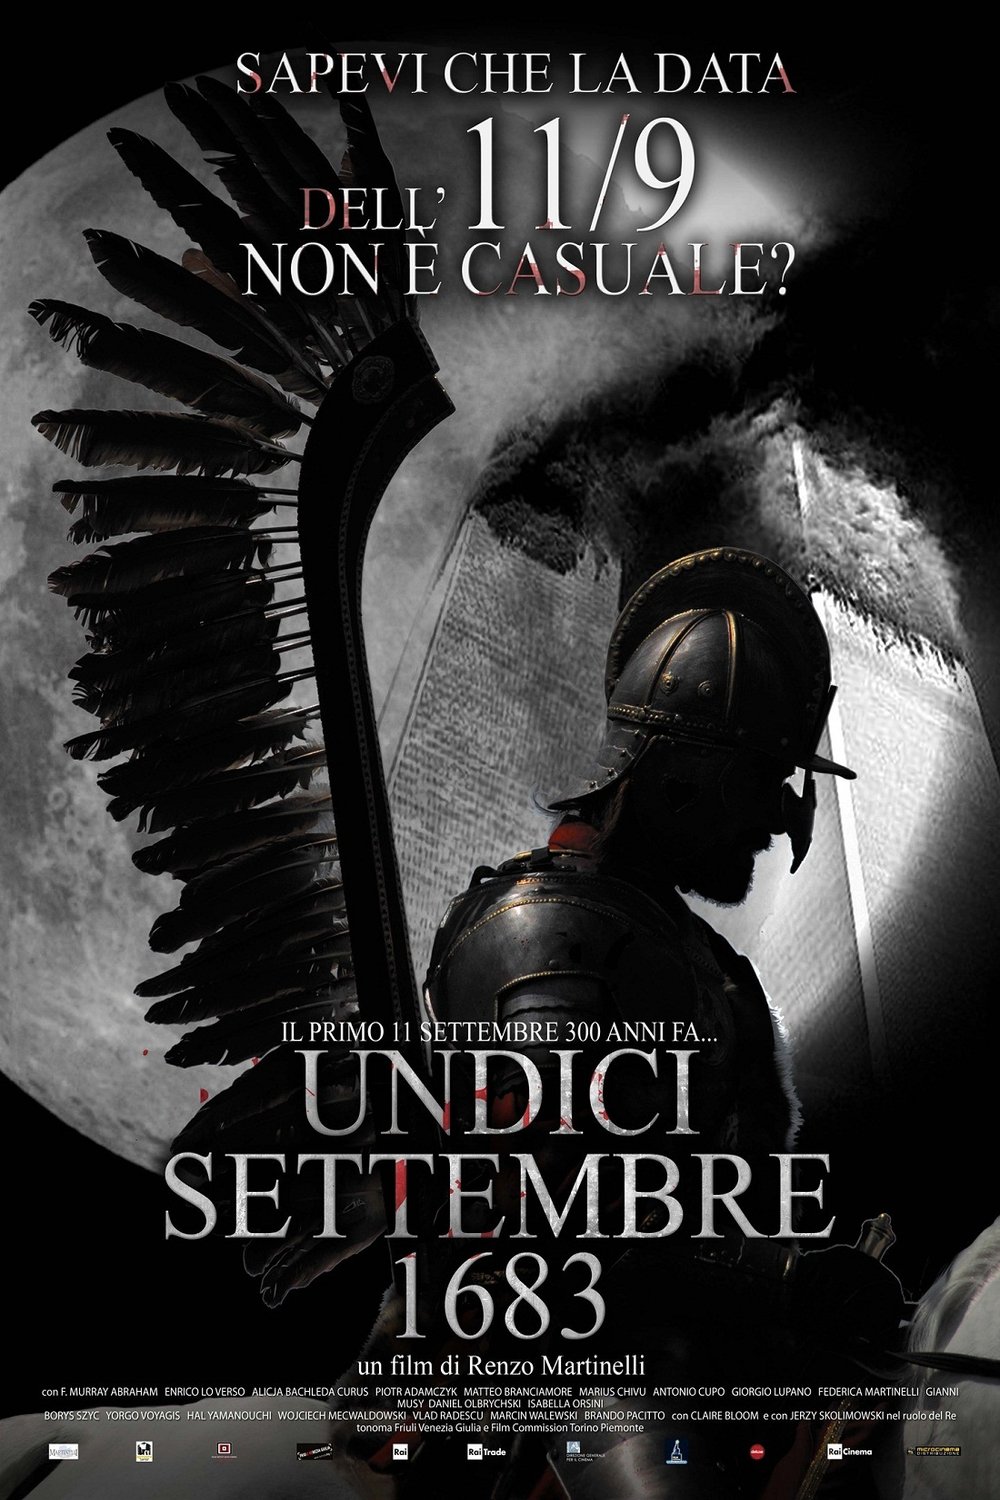 Poster of the movie 11 settembre 1683